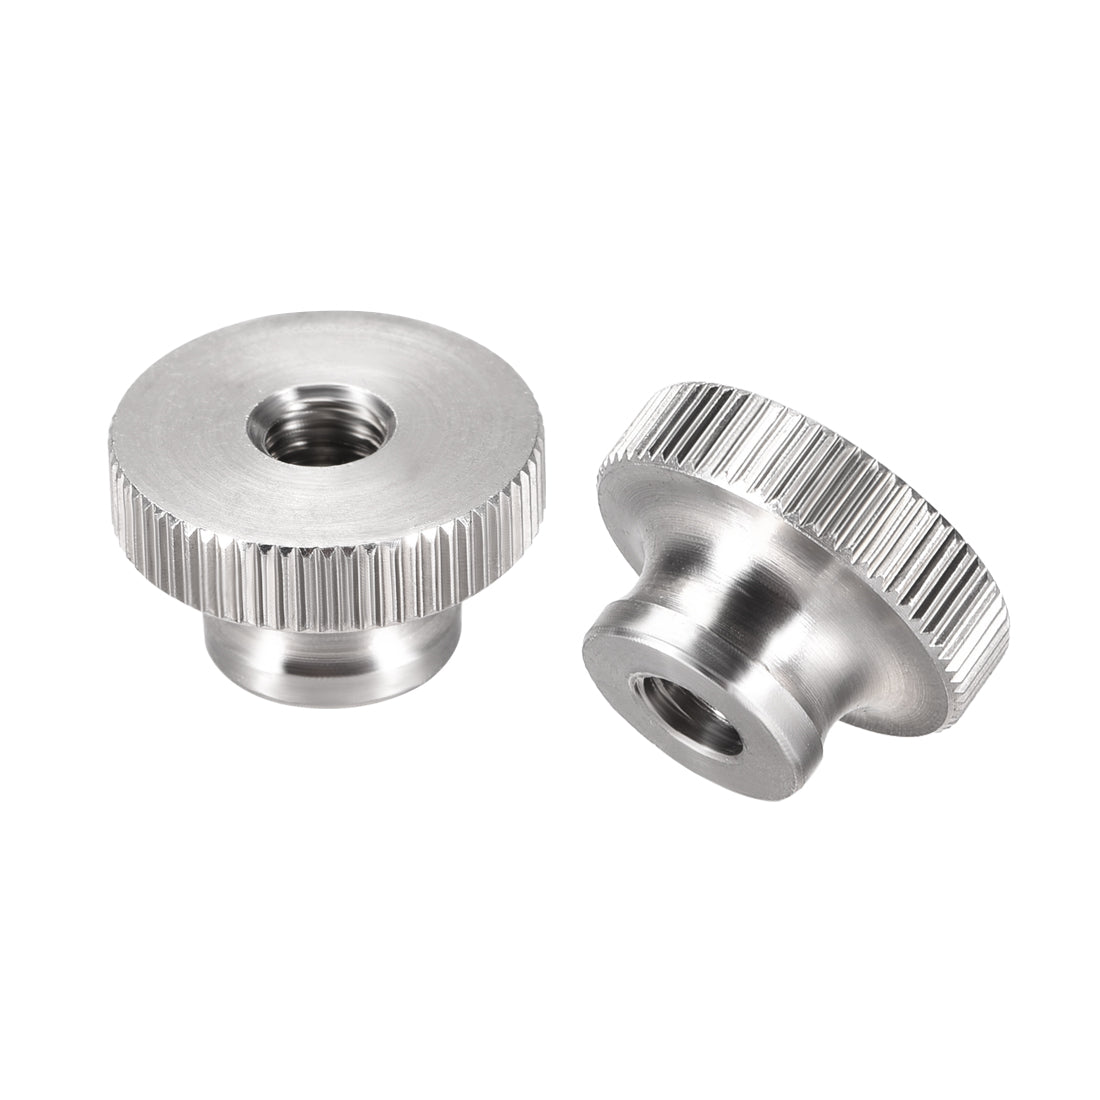 uxcell Uxcell Knurled Thumb Nuts, 2Pcs M6 304 Stainless Steel Round Knobs for 3D Printer Parts